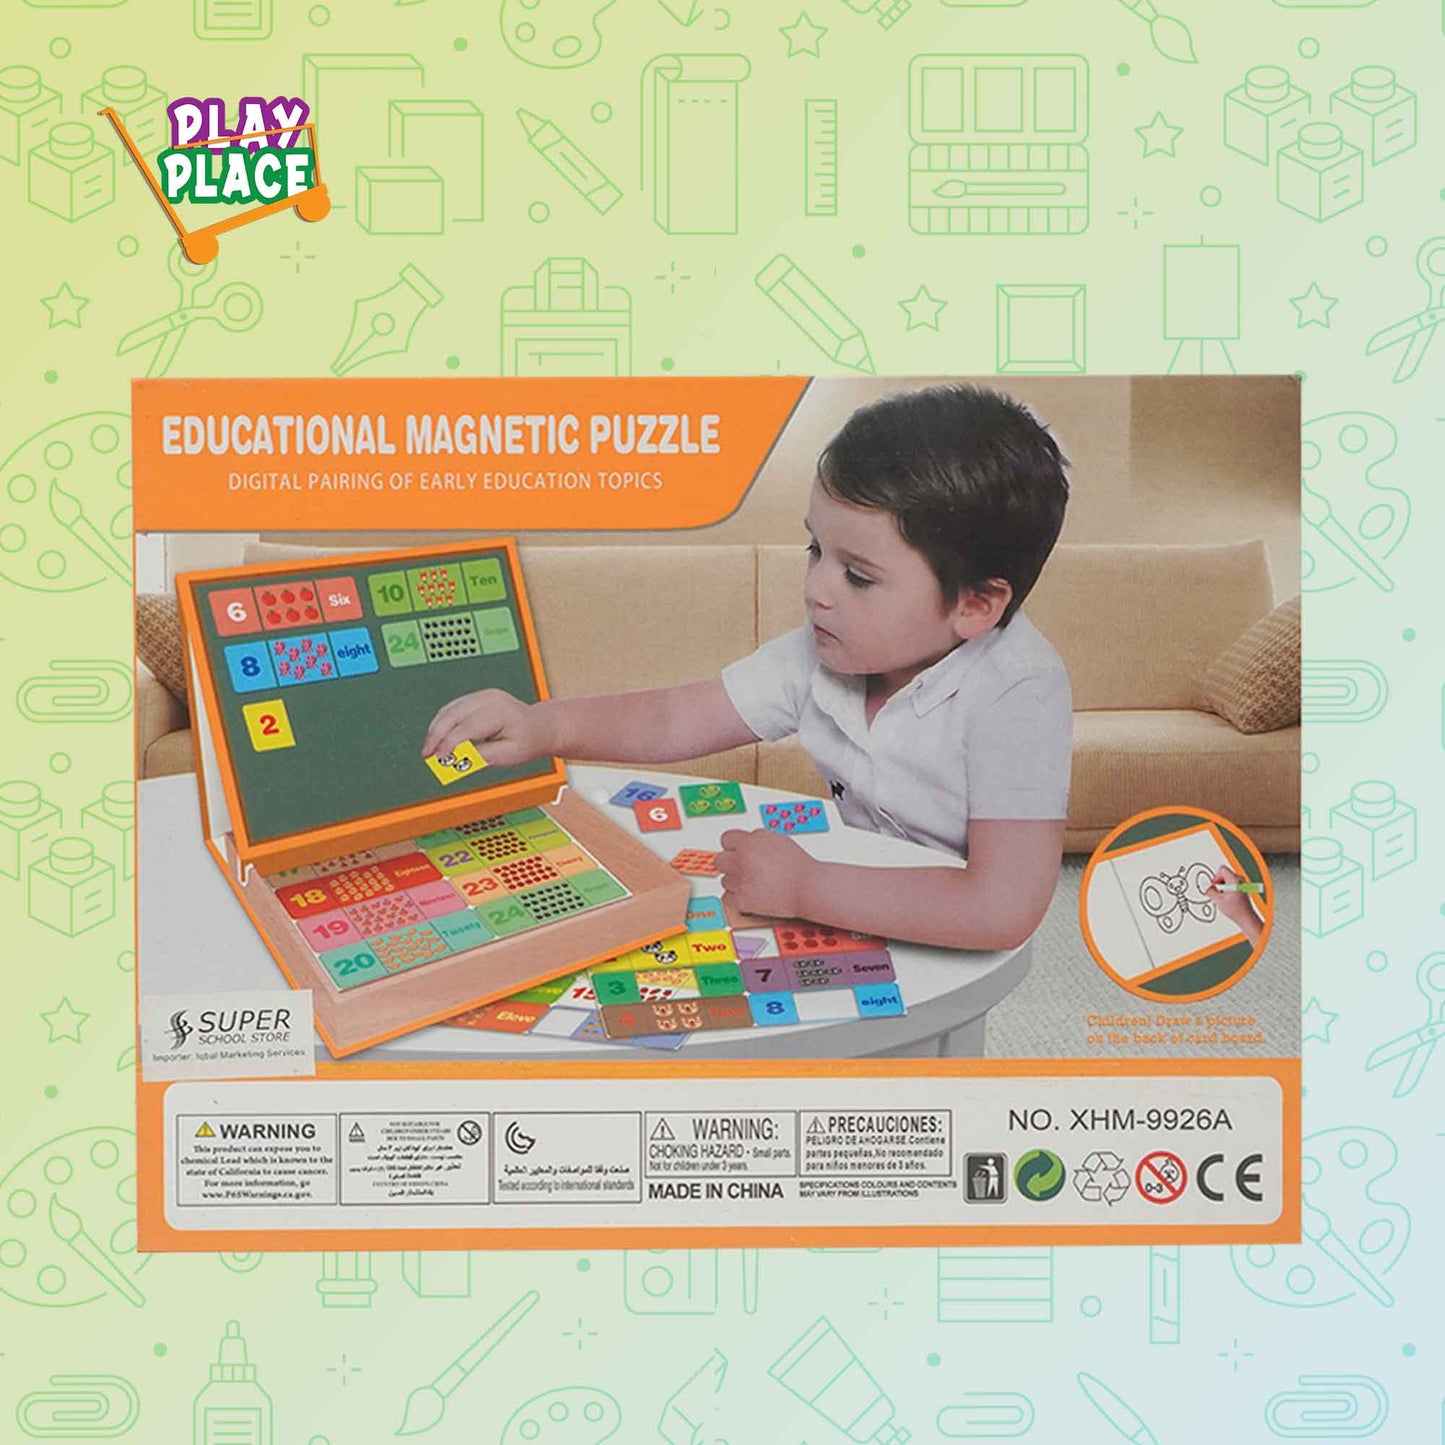 DIY Creative Educational Magnetic Puzzle for Kids